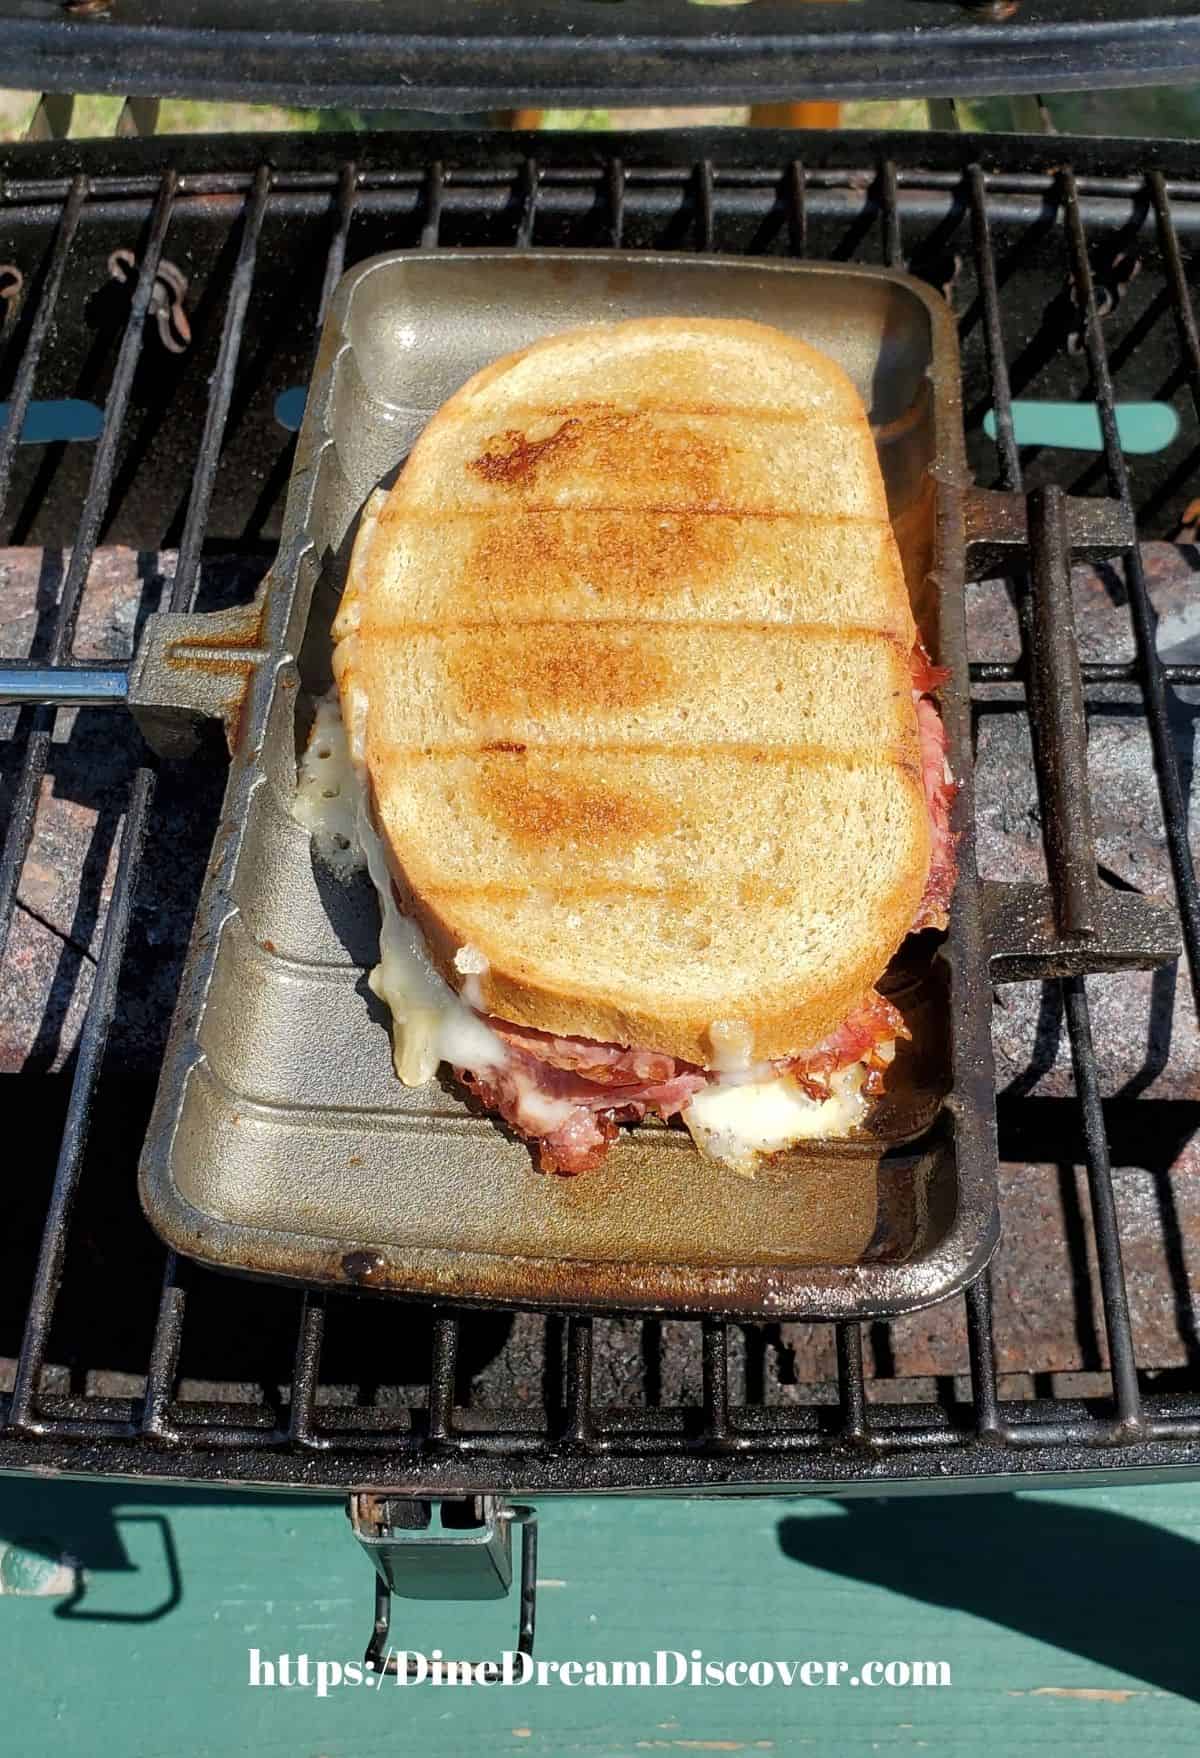 A grilled Reuben sandwich in a pie iron on a grill.